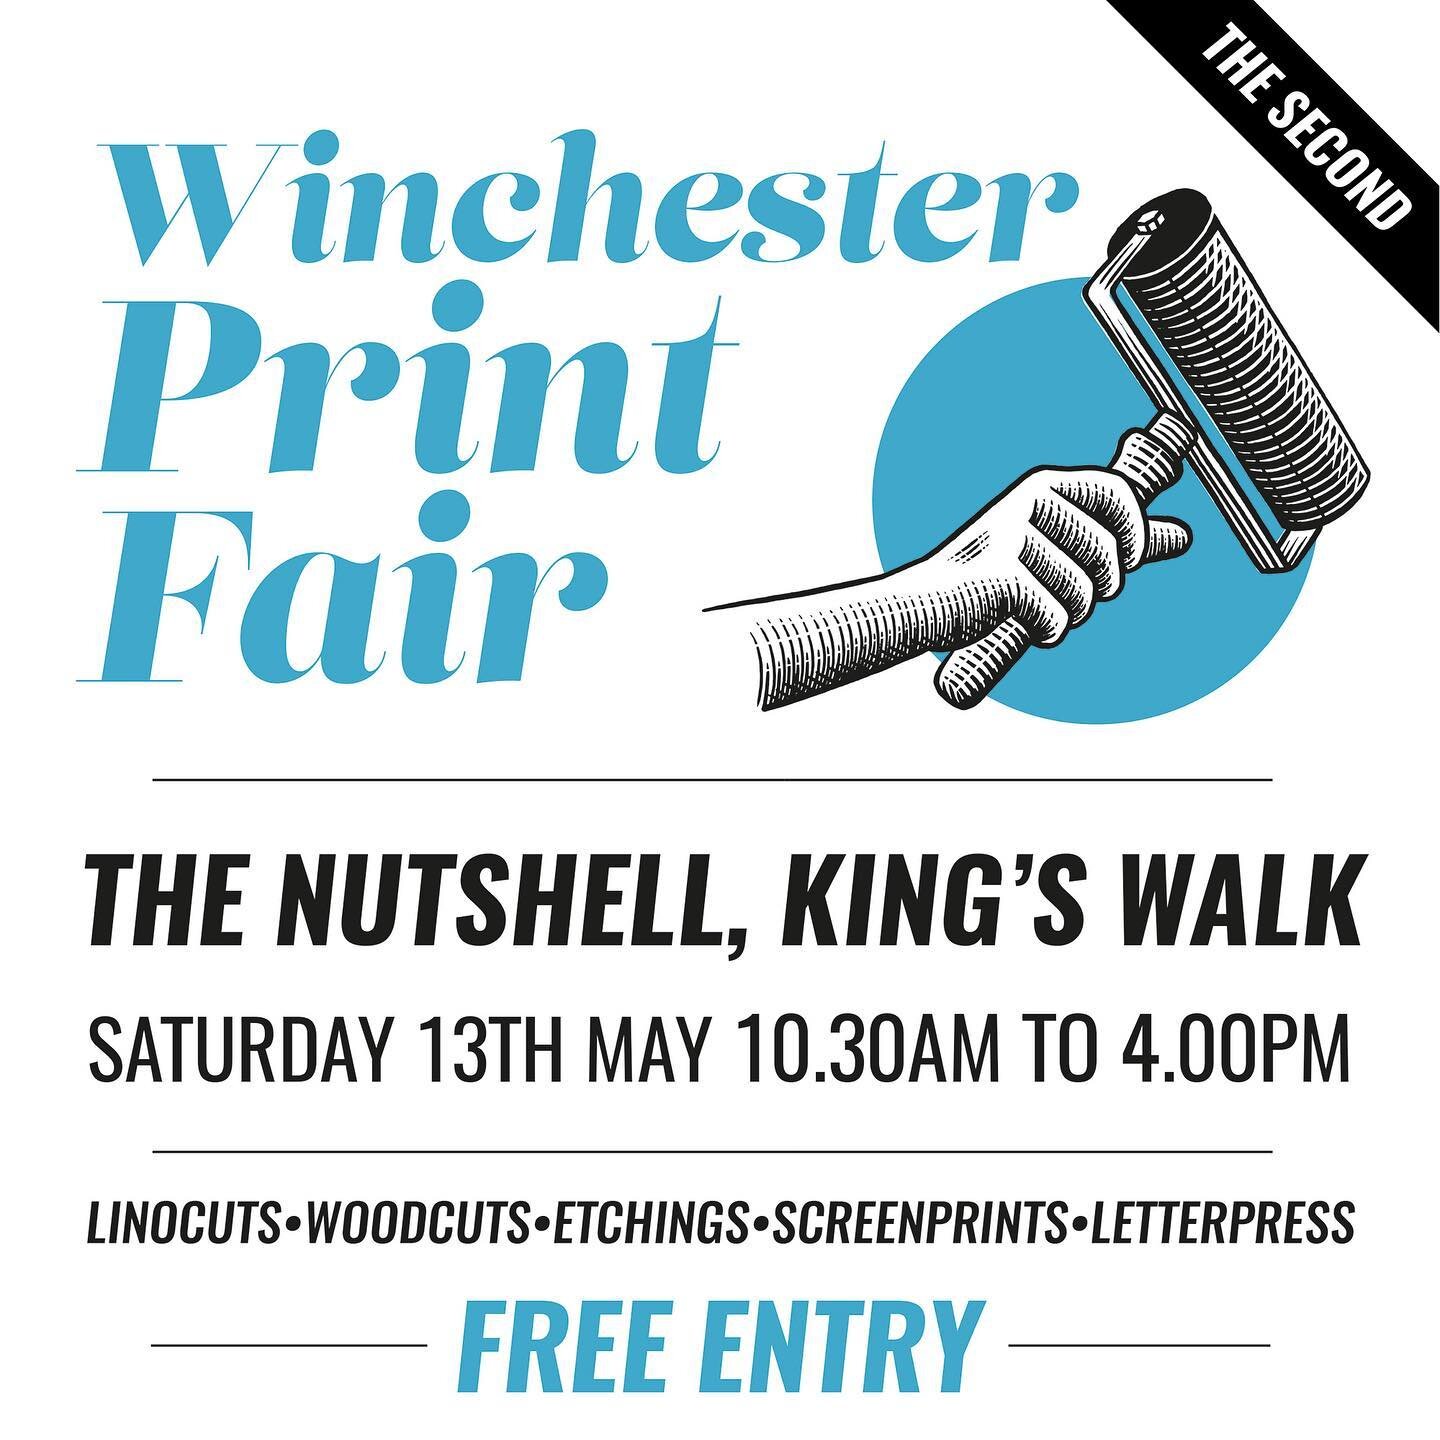 Todays the day! Come say hi if you&rsquo;re in the area&hellip;two floors this year; more artists, more art! Hope to see you there! Caroline 🌿
.
.
.
.
.
#winchester #artinwinchester #printfair #artfair #originalartforsale